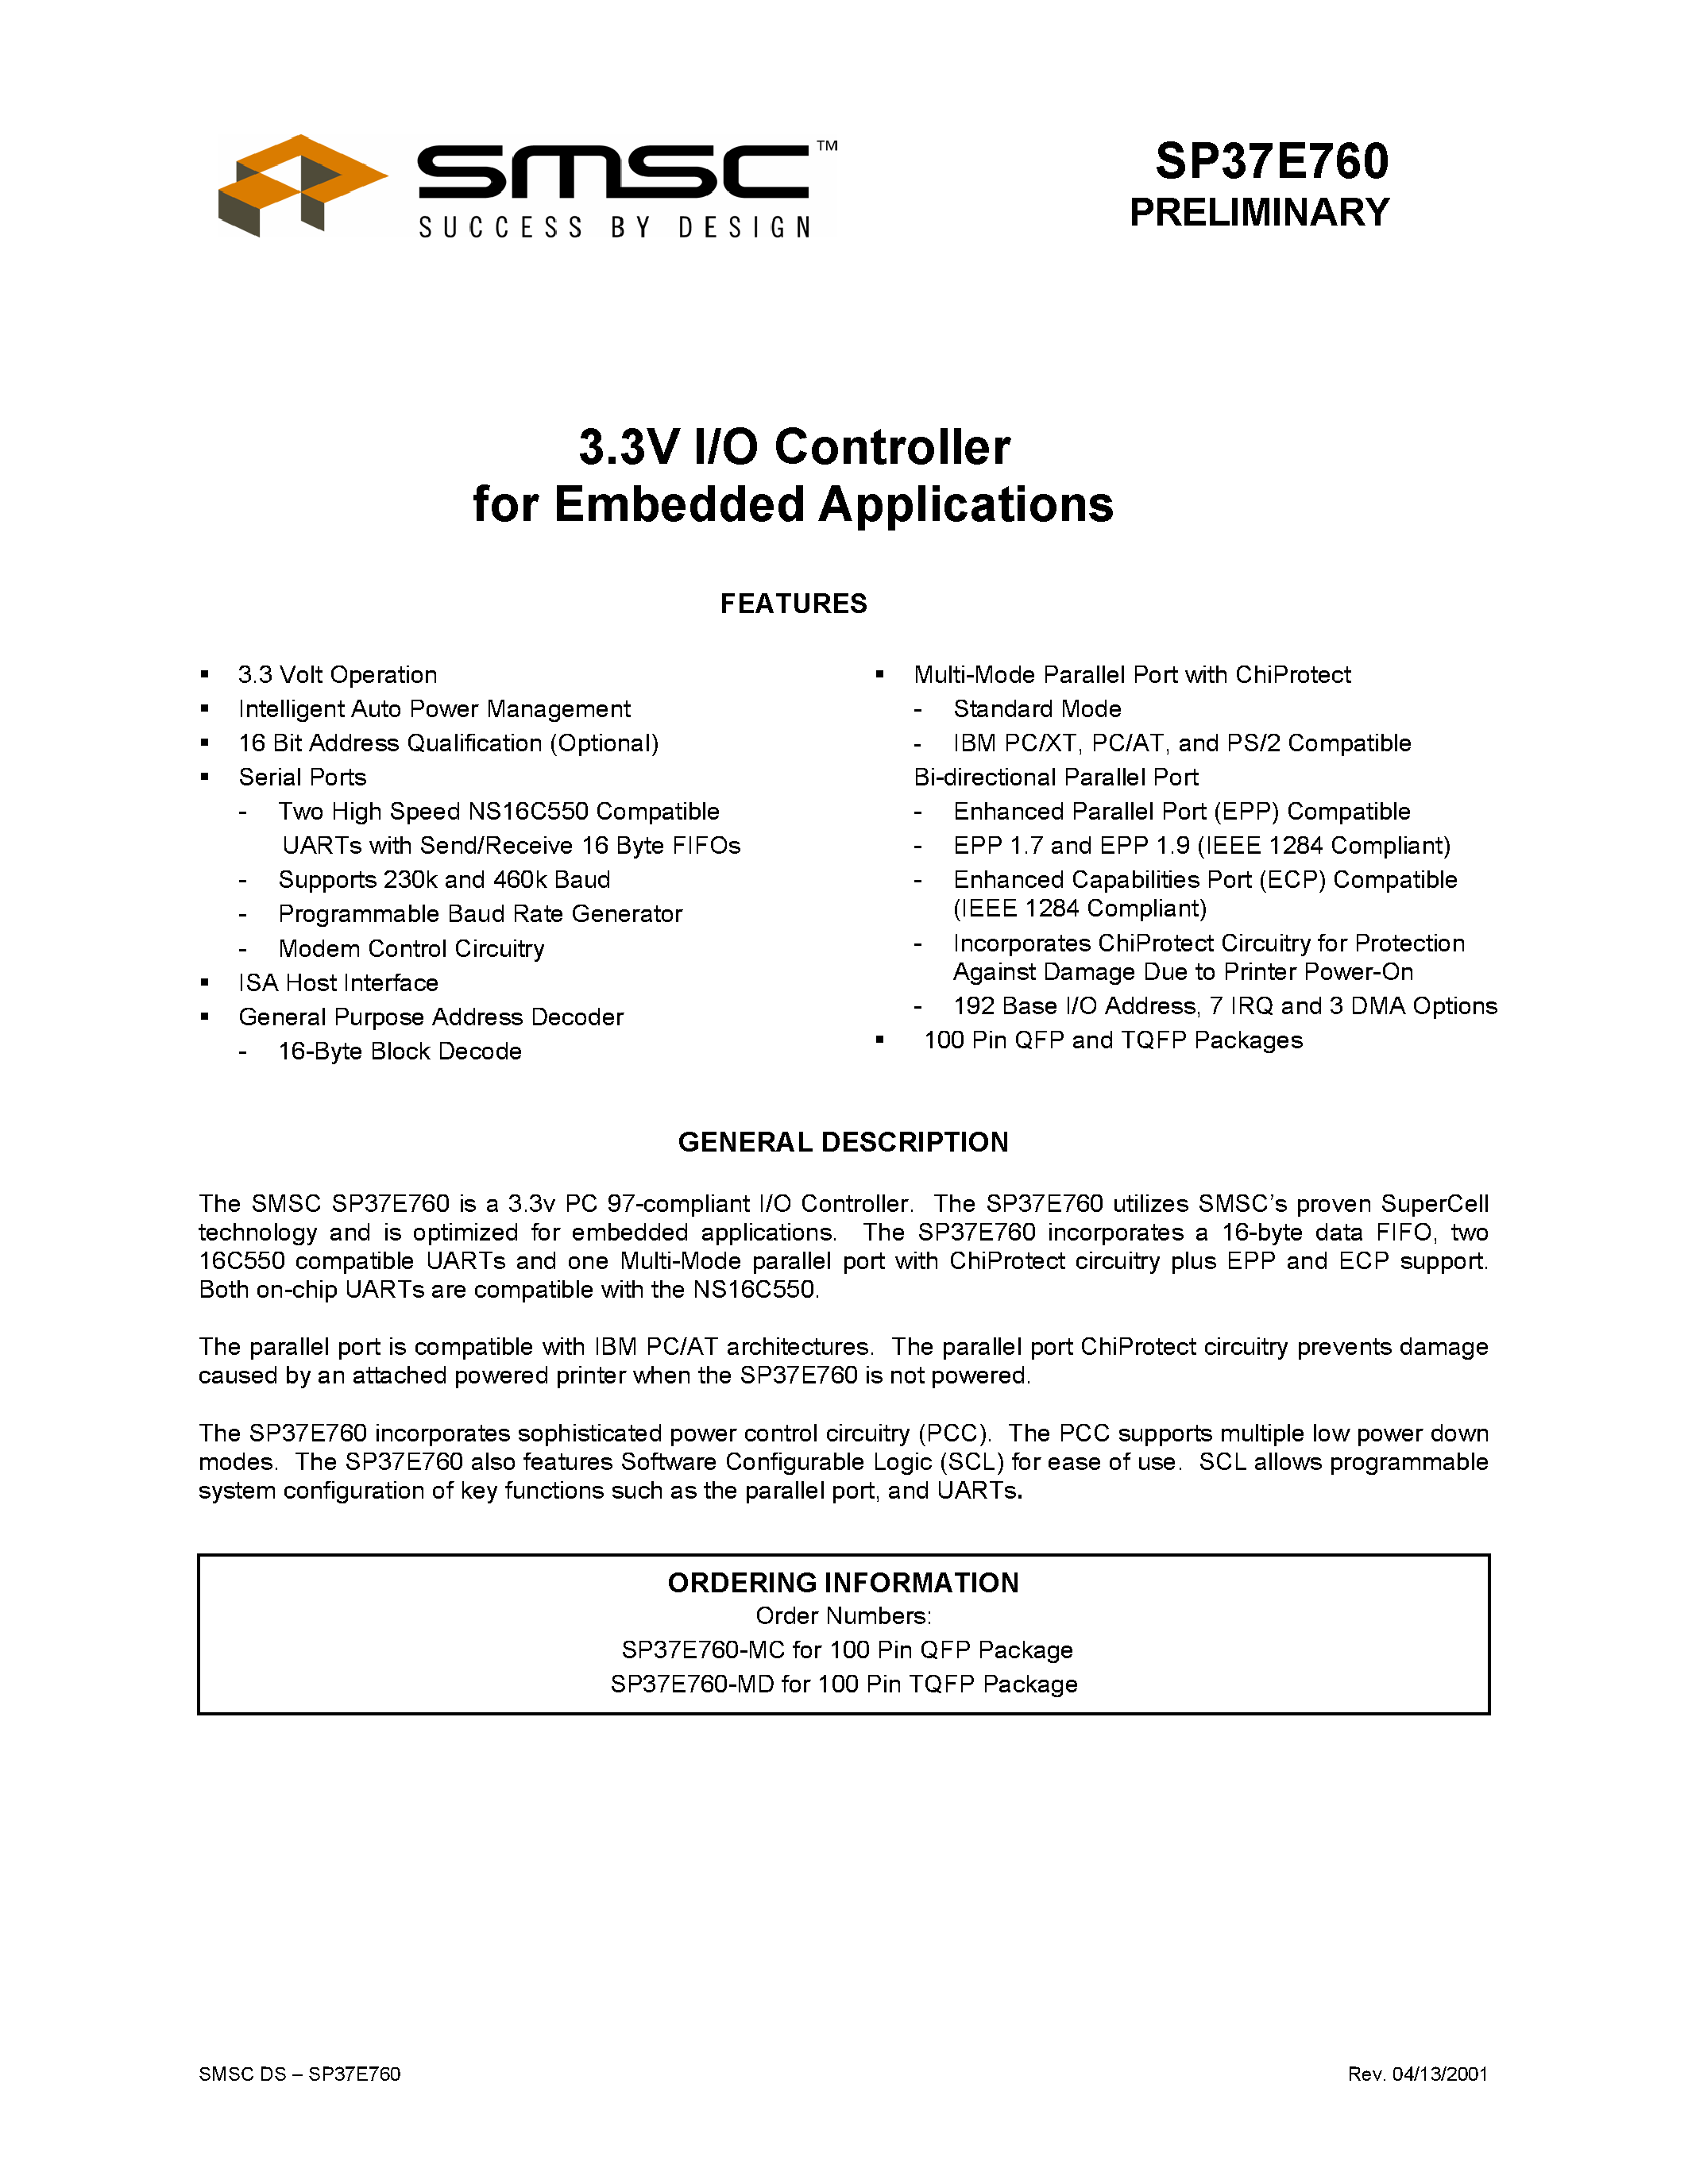 Datasheet SP37E760-MC - 3.3 V I/O CONTROLLER FOR EMBEDDED APPLICATIONS page 1